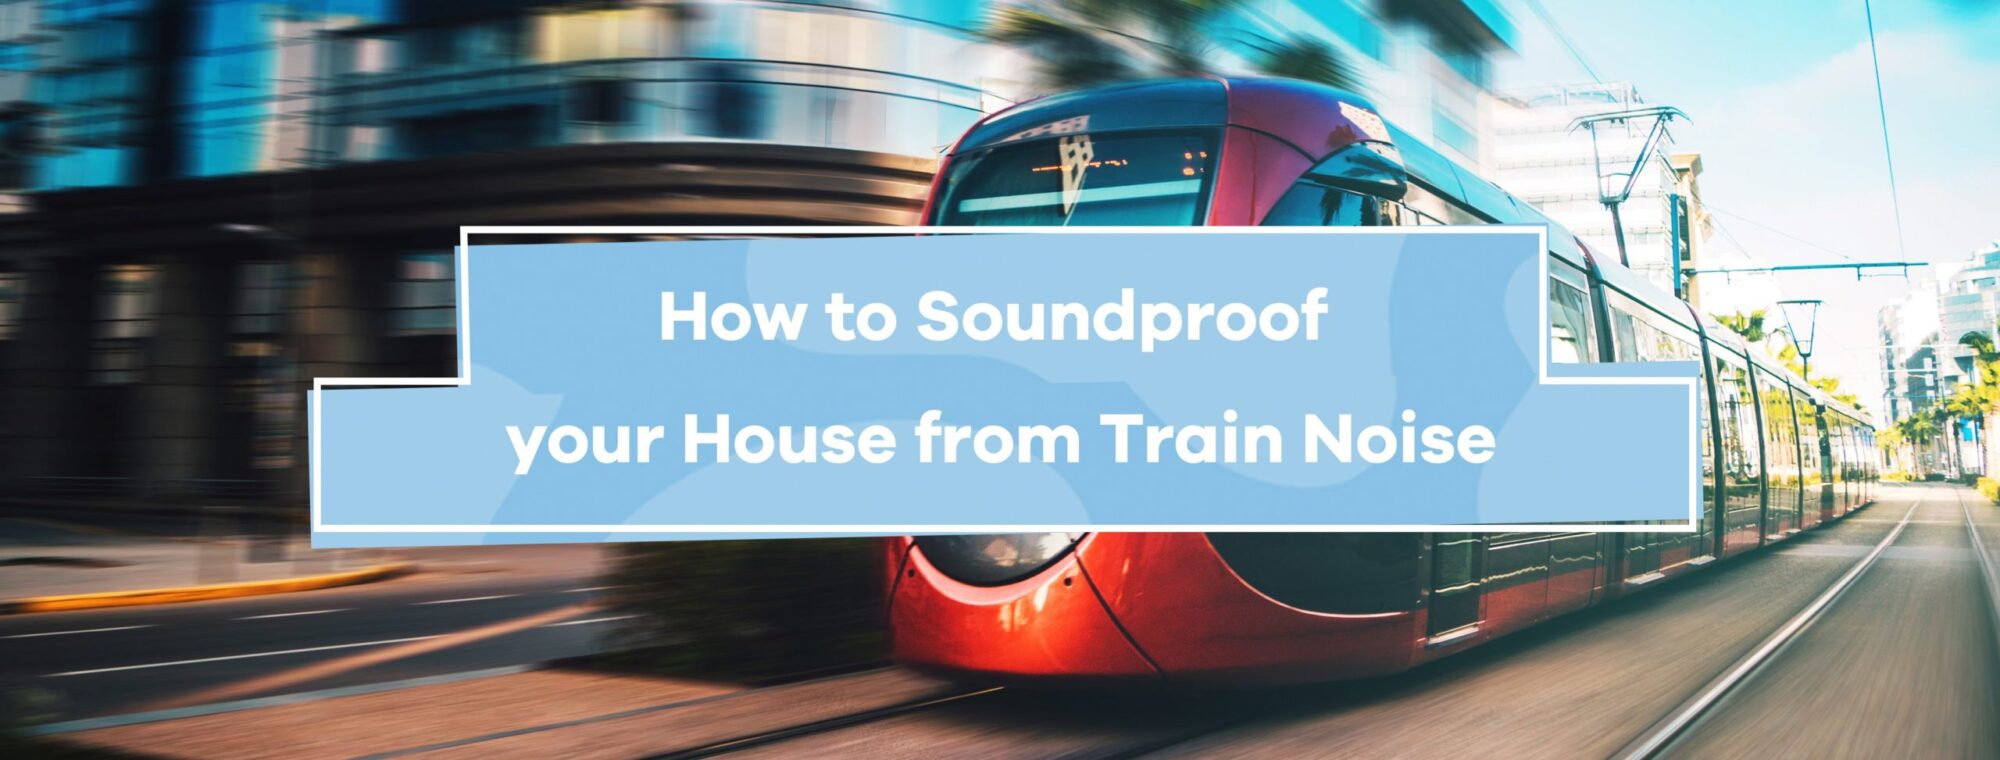 How to Soundproof Your House From Train Noise